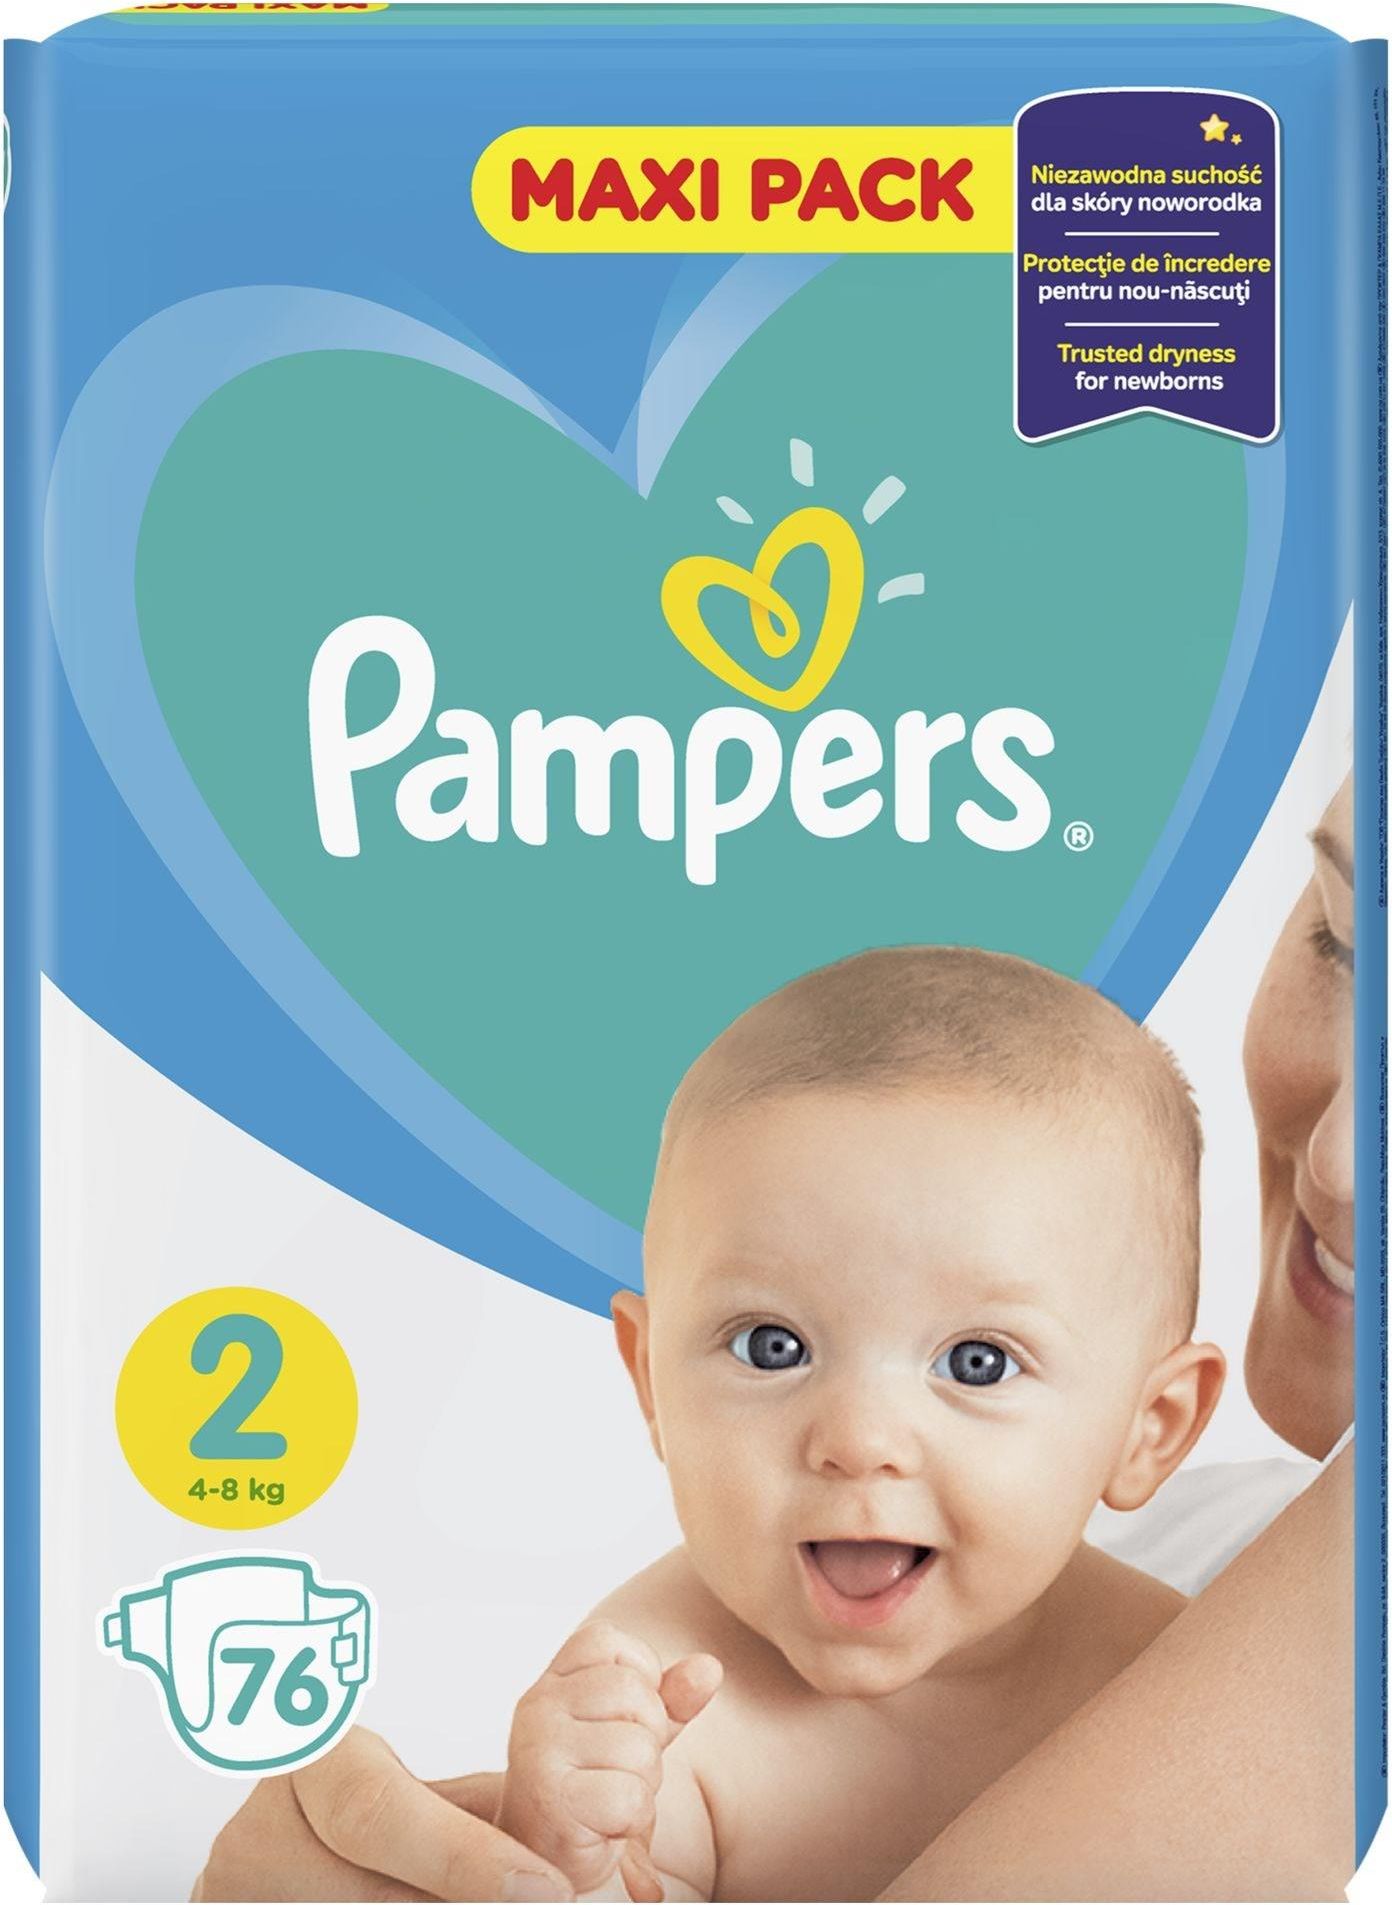 pampers new baby dry 2 promocja